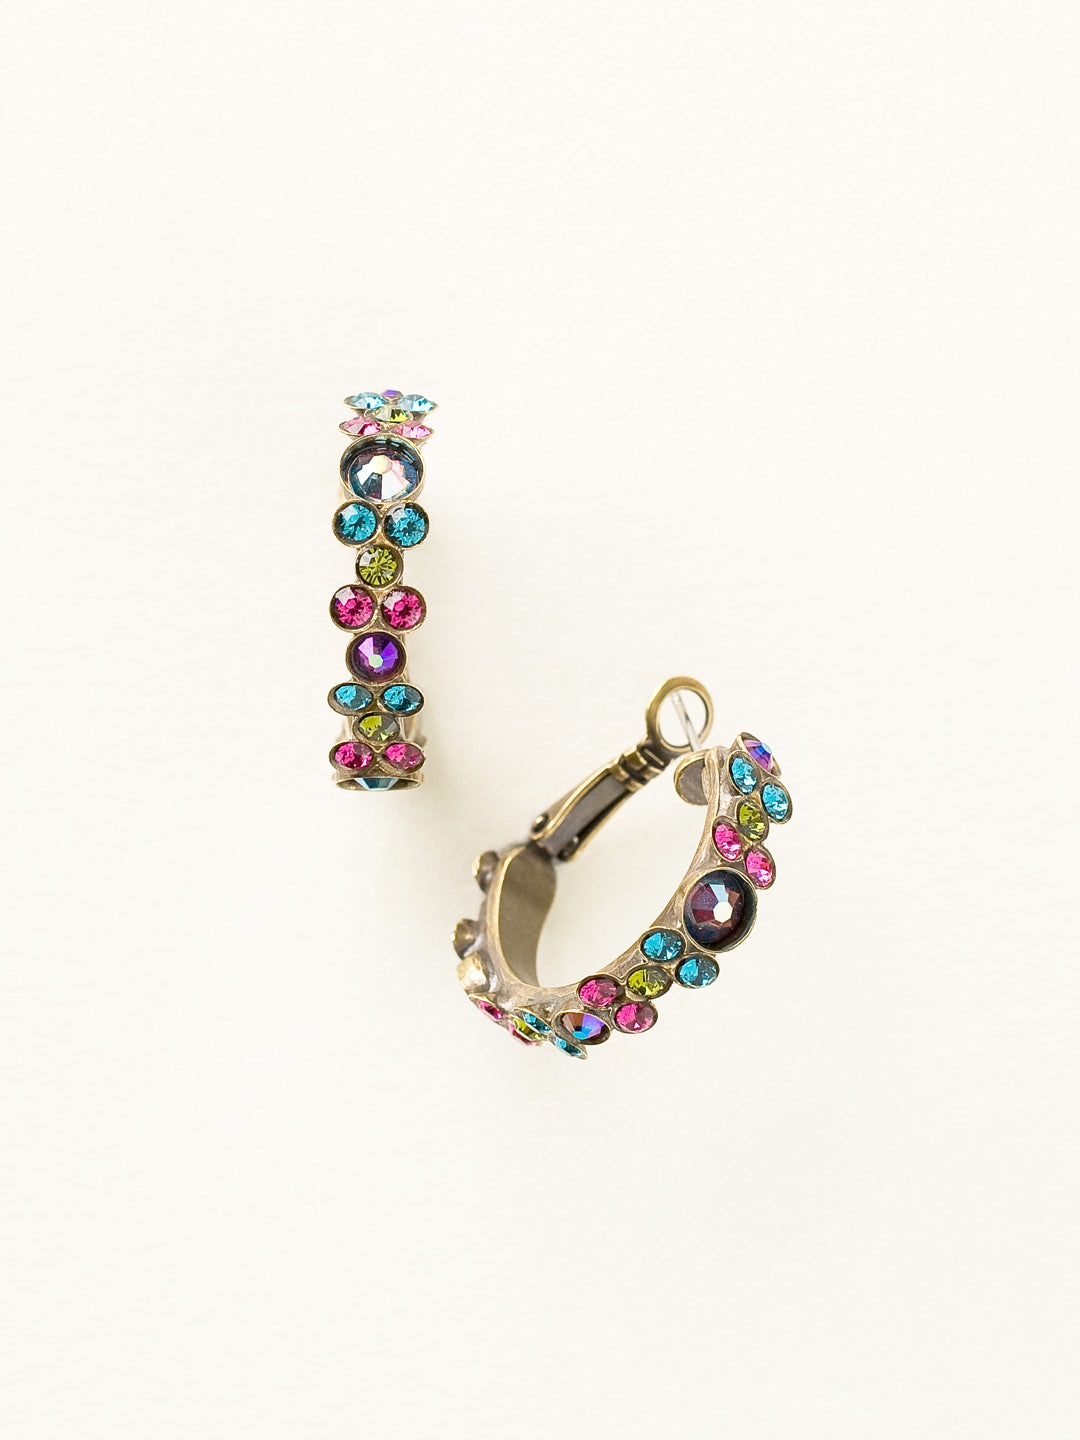 Floral Hoop Earrings - EBP15AGSPM - <p>Intricate design, infused with gorgeous shine. A motif of floral clusters is featured here on a small, delicate hoop with a hinged post backing. From Sorrelli's Super Multi collection in our Antique Gold-tone finish.</p>